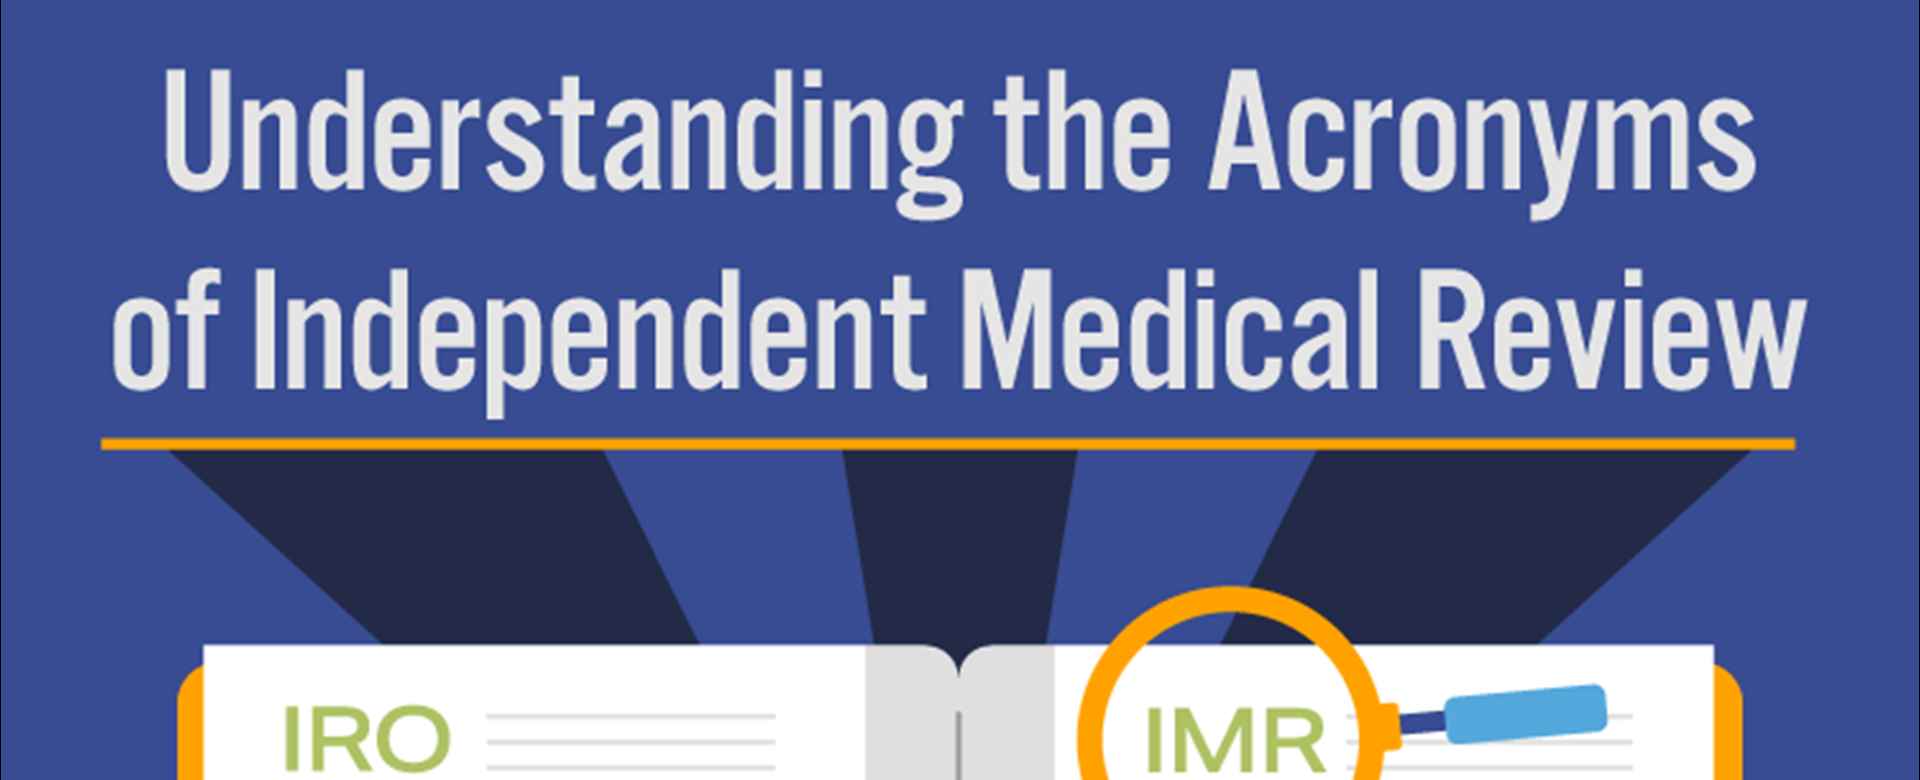 Understanding the Acronyms of Independent Medical Review